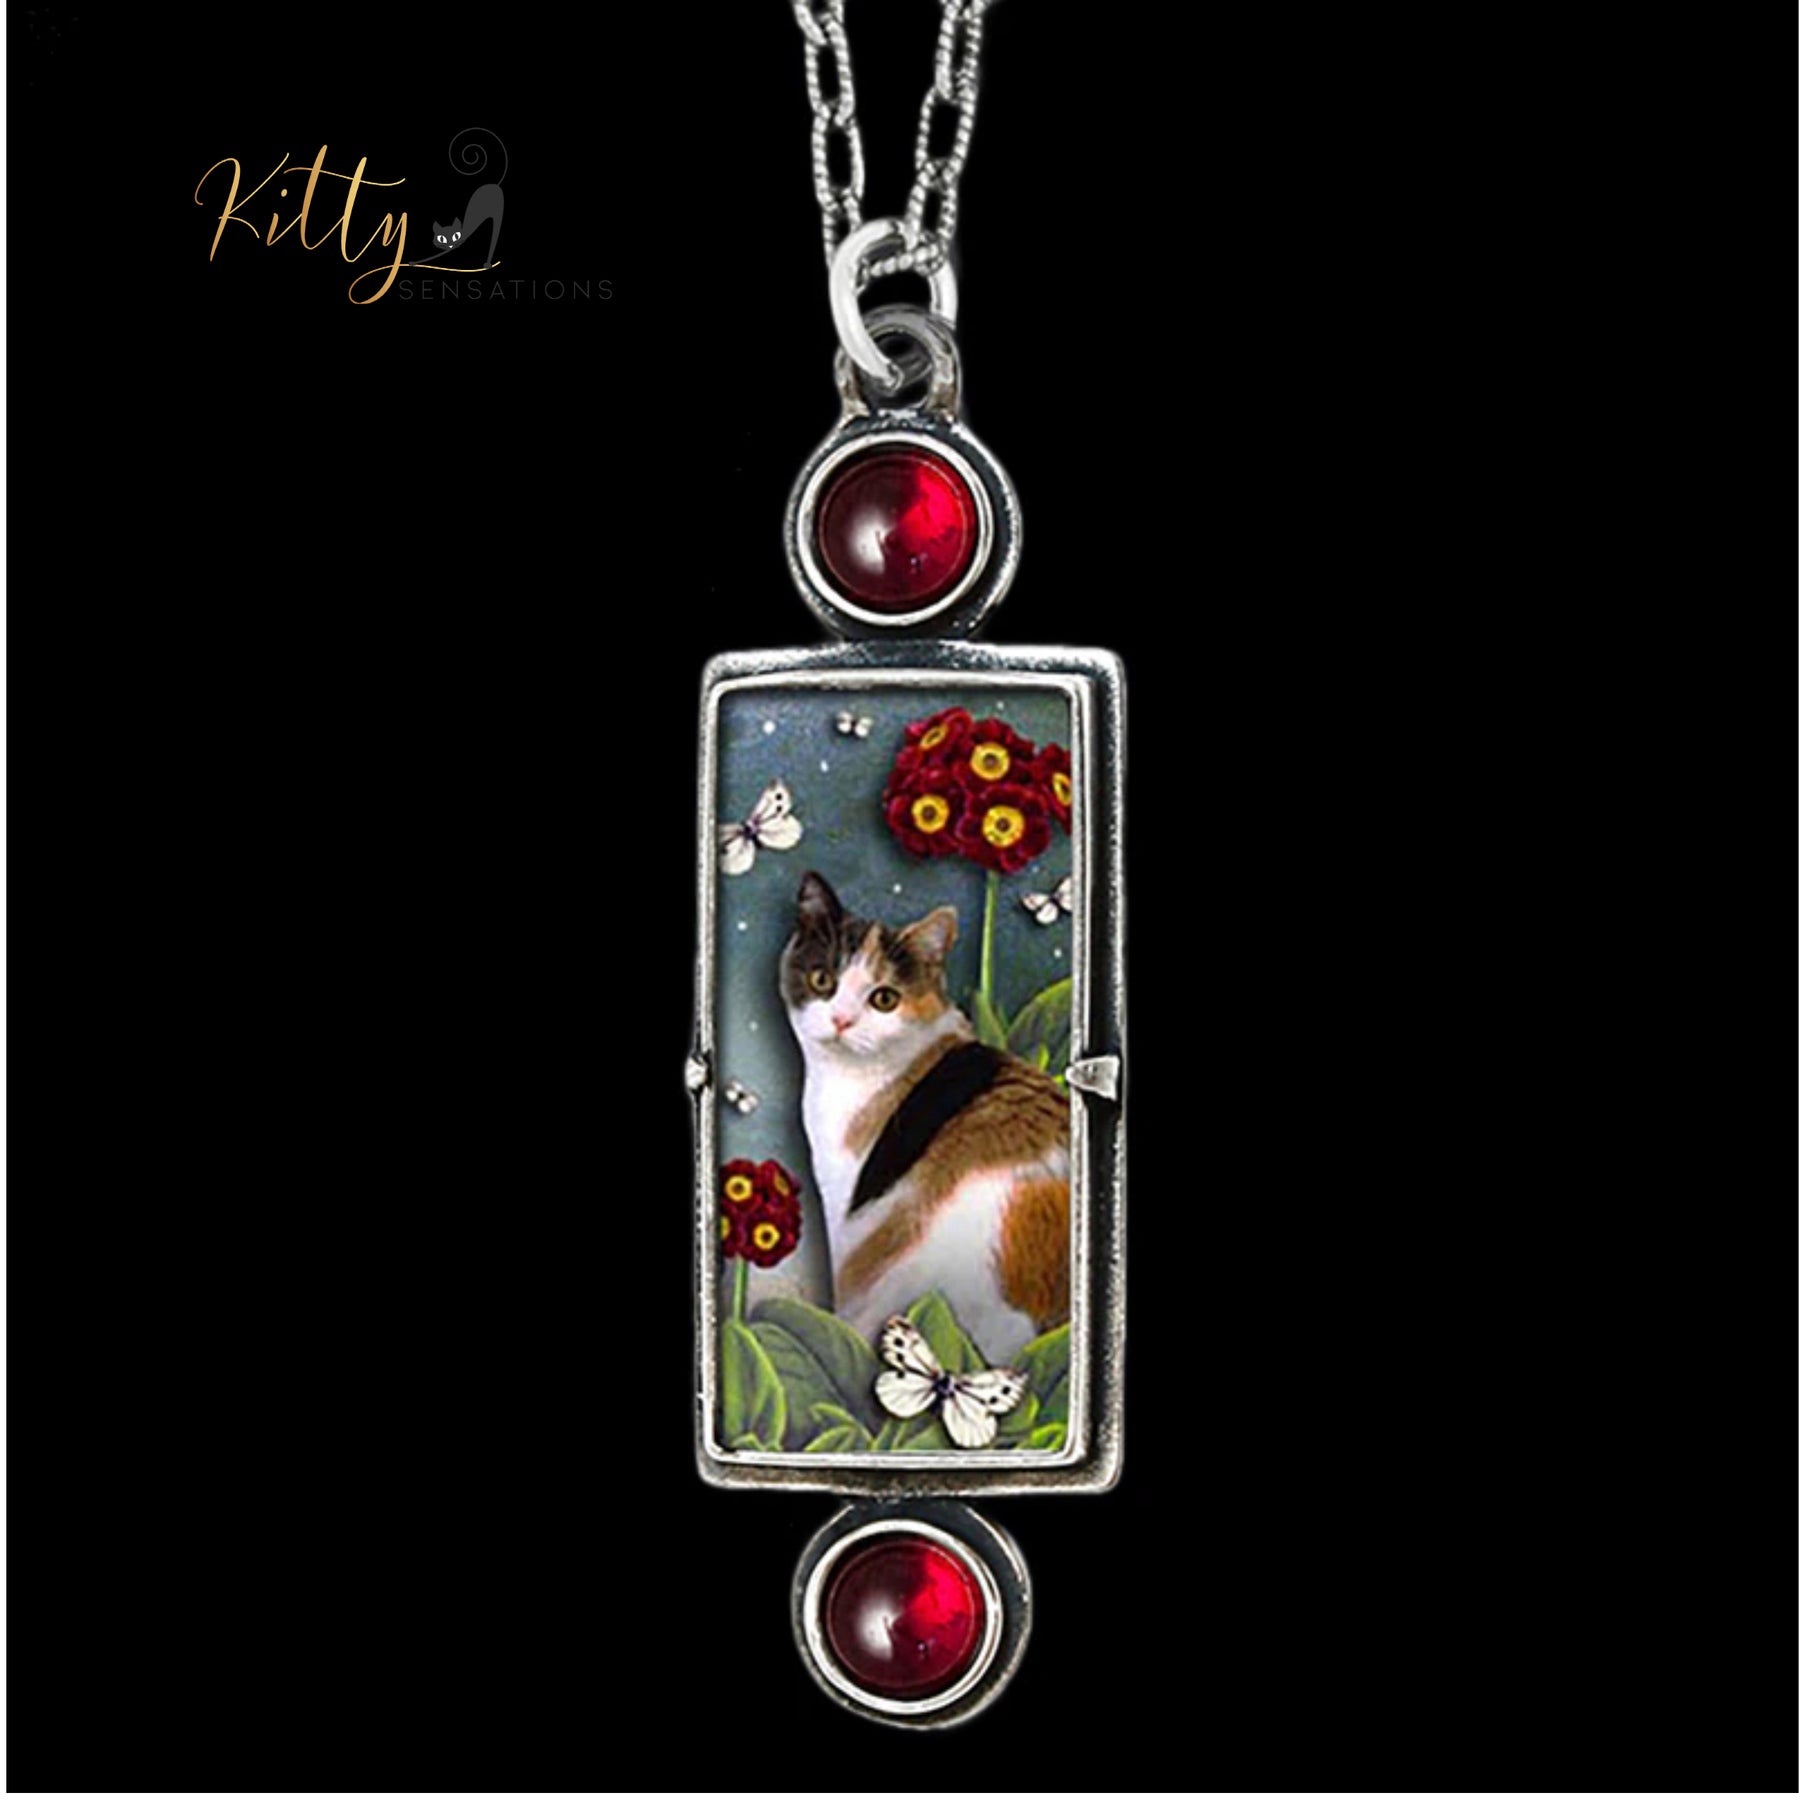 www.KittySensations.com: Two Garnets and A Kitty Necklace - Adjustable Length ($18.35): https://www.kittysensations.com/products/two-garnets-and-a-kitty-necklace